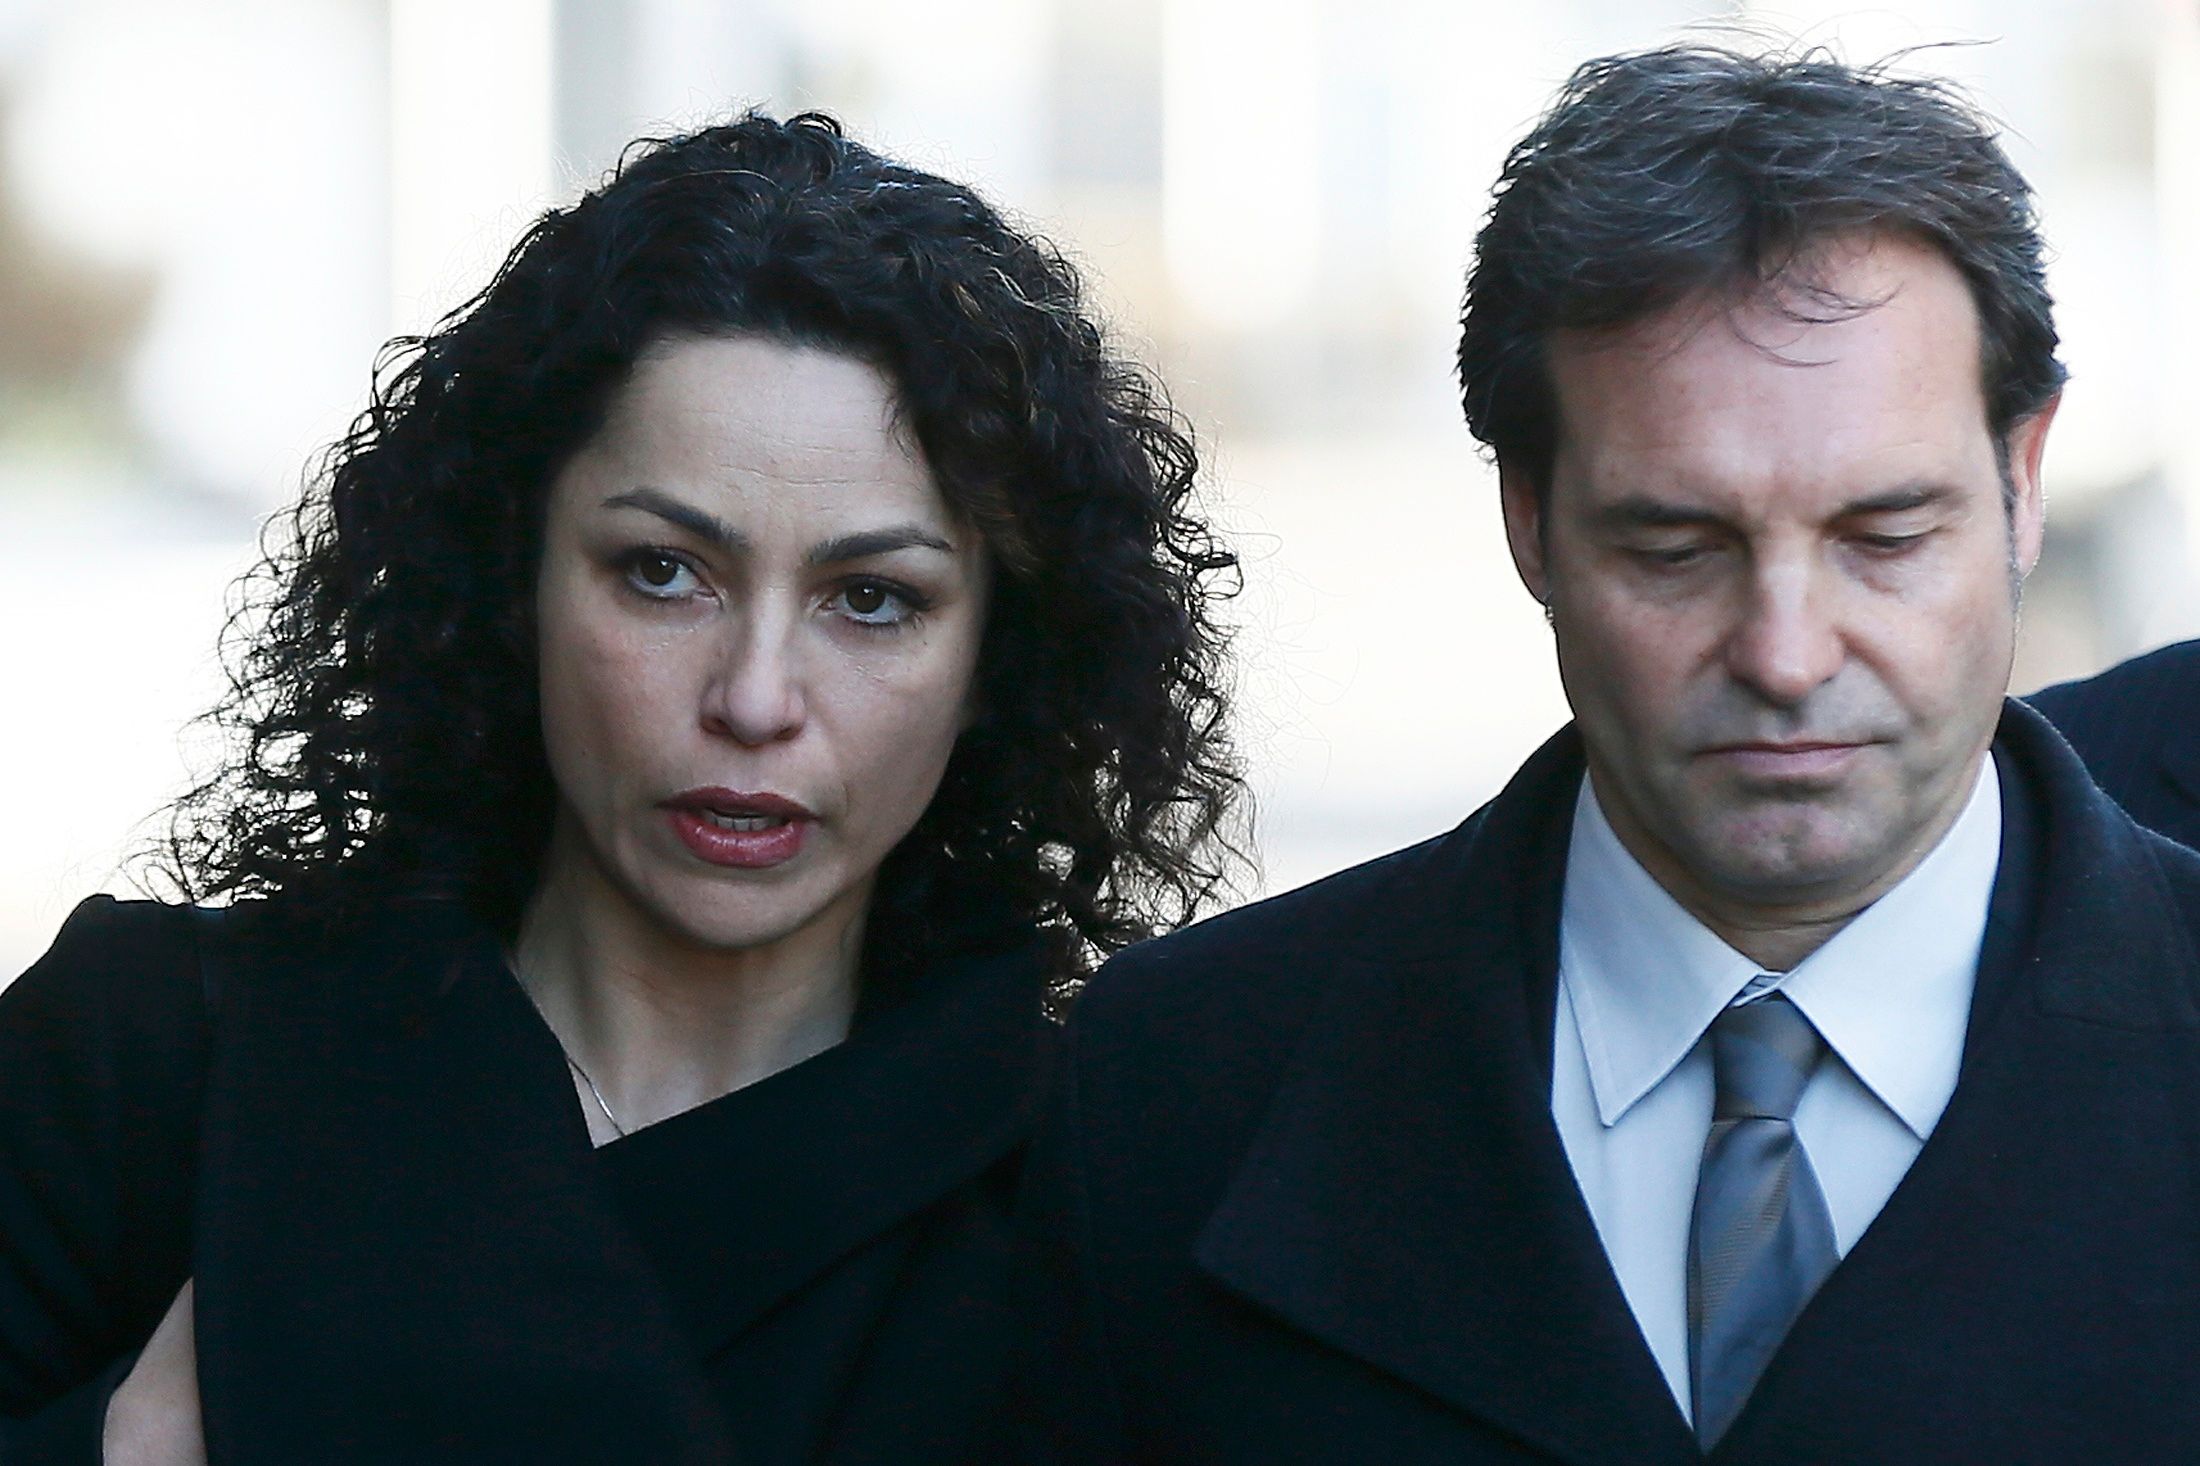 Former Chelsea Football Club doctor Eva Carneiro arrives with her husband Jason De Carteret to attend a hearing for her constructive dismissal case against the club, at London South Employment Tribunal in Croydon, London, Britain March 7, 2016. REUTERS/Stefan Wermuth  
Picture Supplied by Action Images